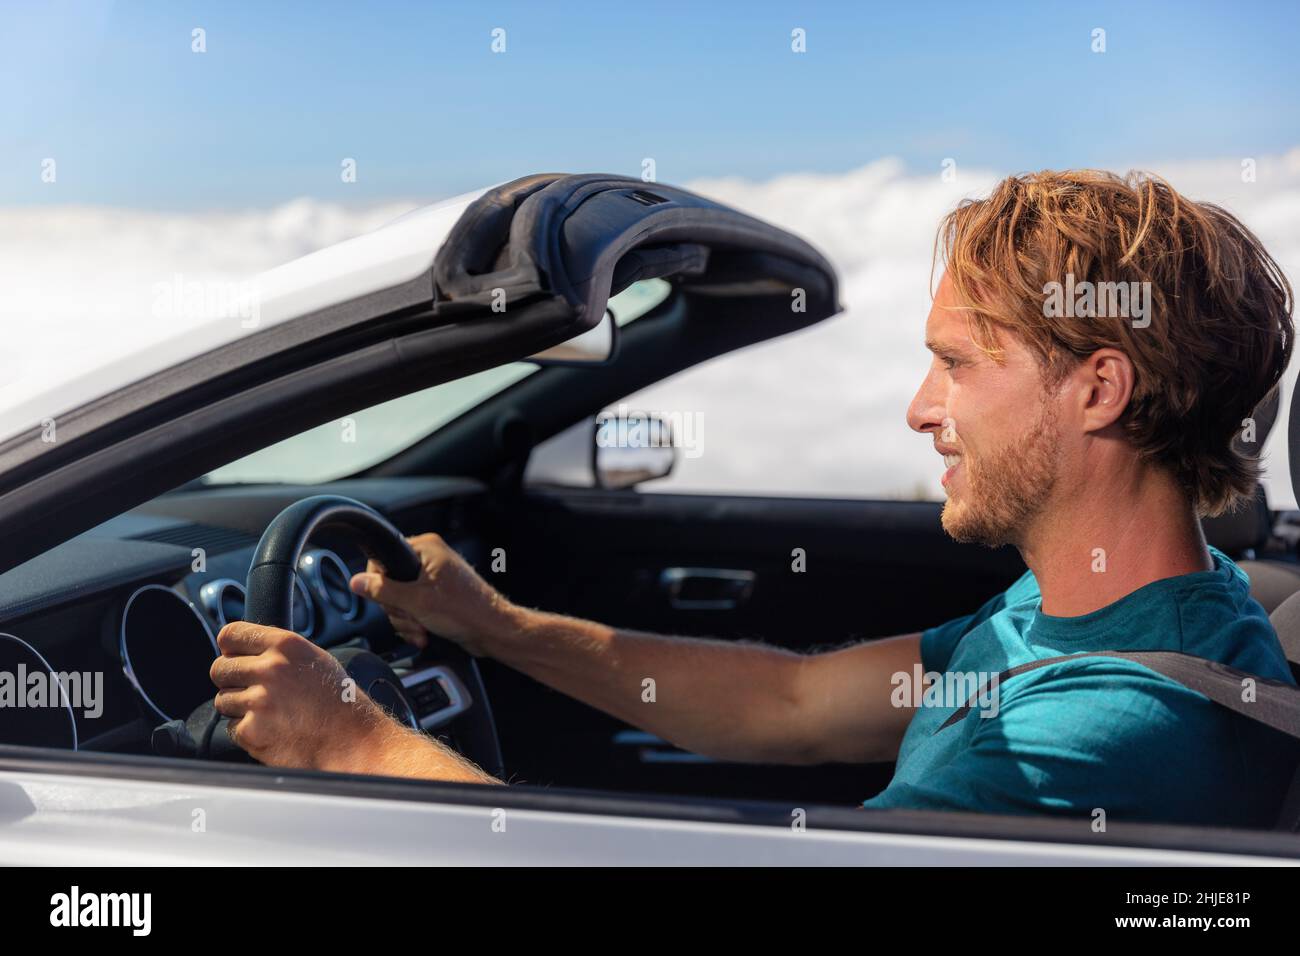 https://c8.alamy.com/comp/2HJE81P/road-trip-drive-young-man-driver-driving-open-roof-convertible-sports-car-on-summer-travel-holiday-vacation-side-profile-portrait-youn-guy-in-his-30s-2HJE81P.jpg